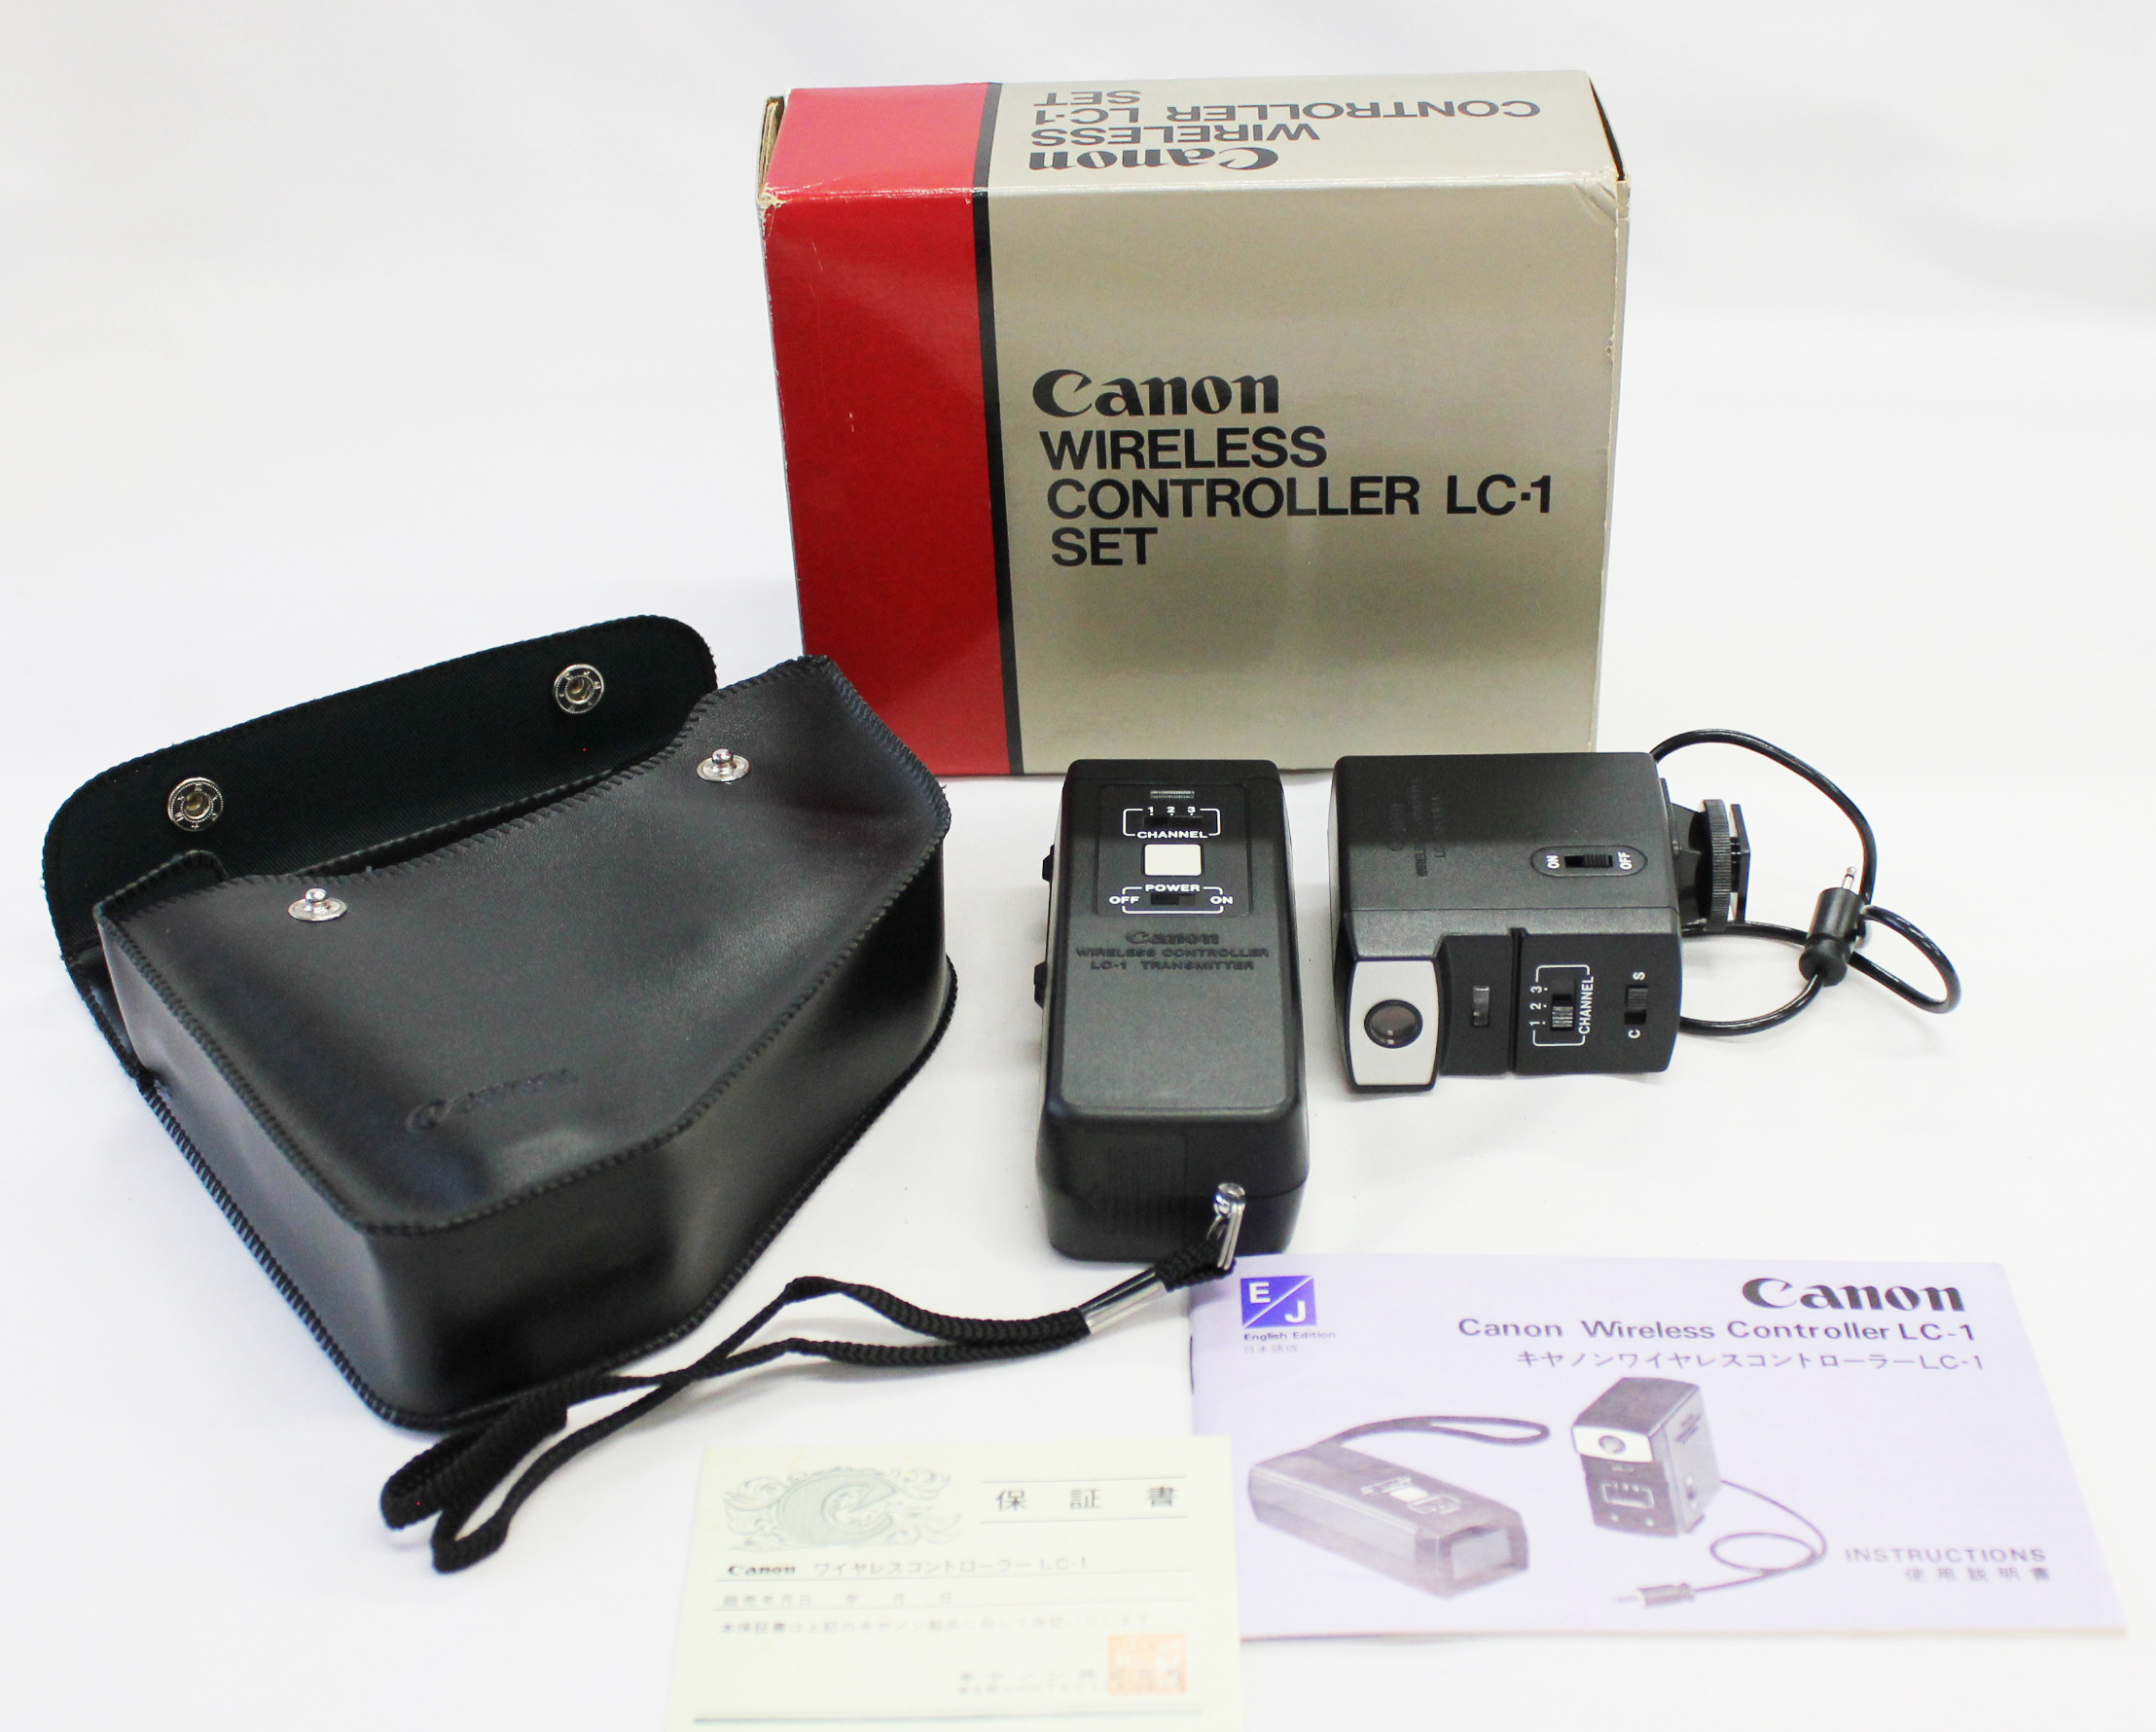 Canon Wireless Controller LC-1 Transmitter Receiver Set in Box for A-1 & F-1 from Japan 